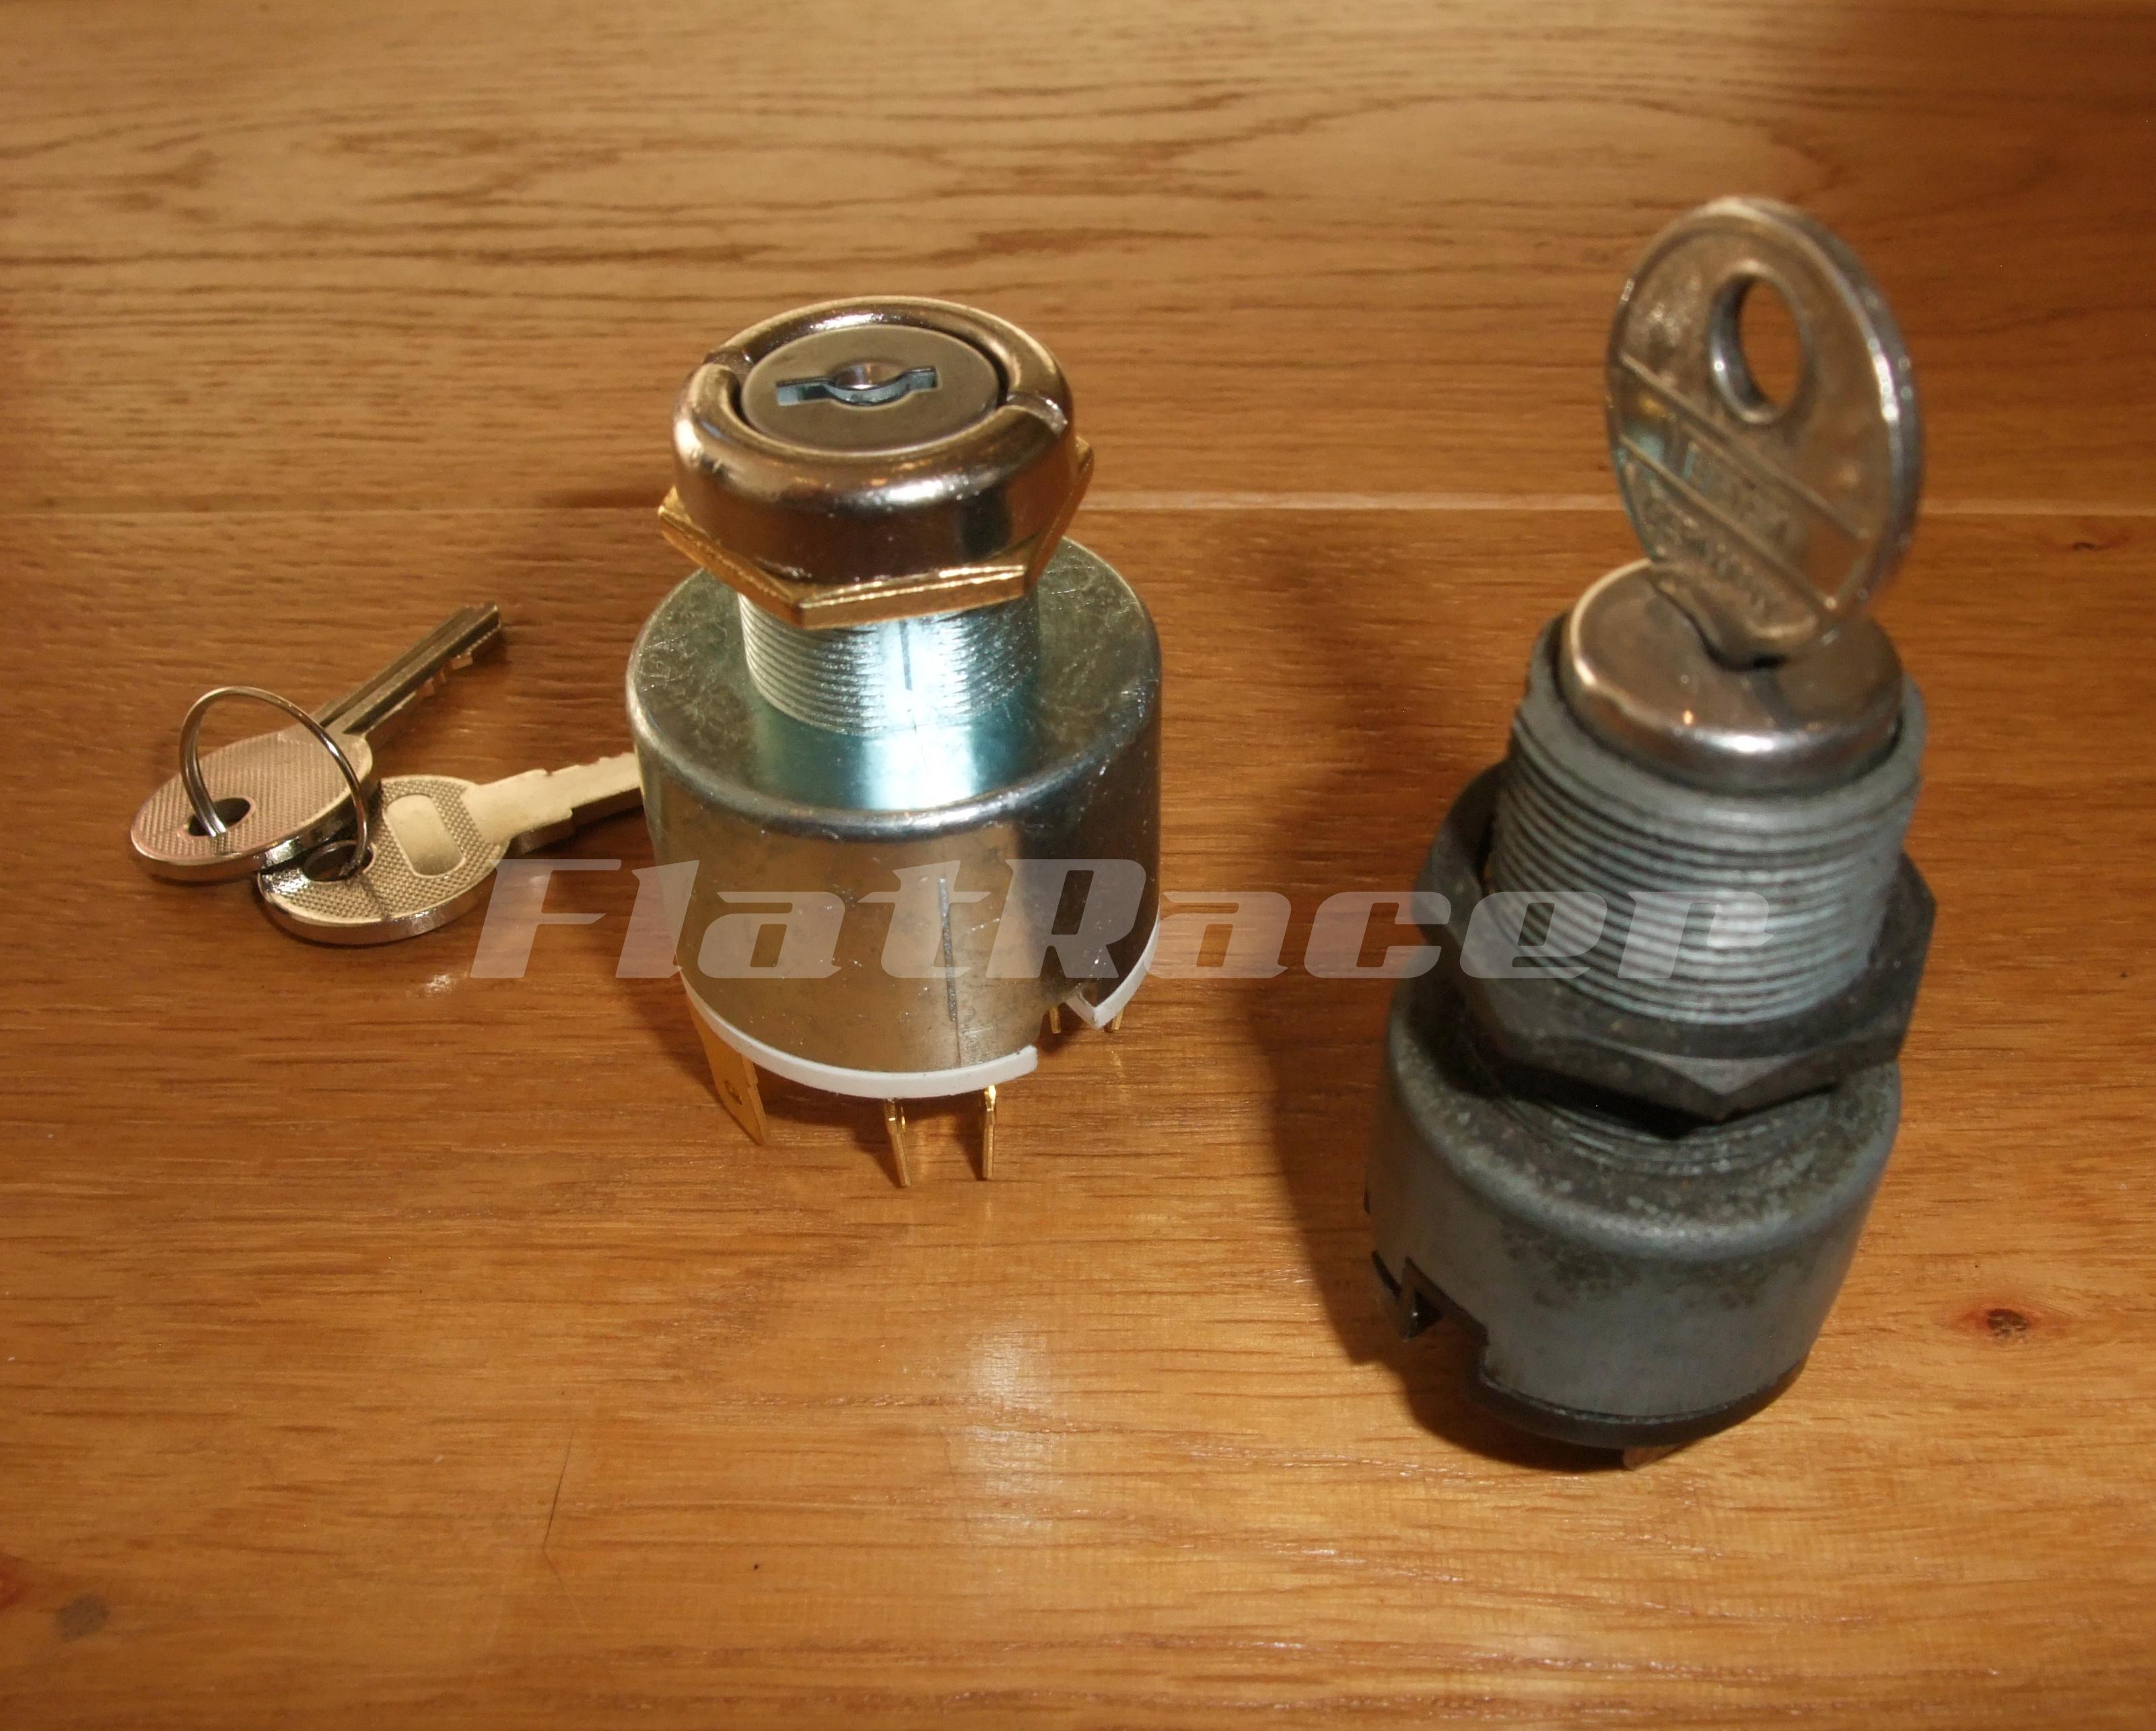 Universal fit ignition switch - 3 position